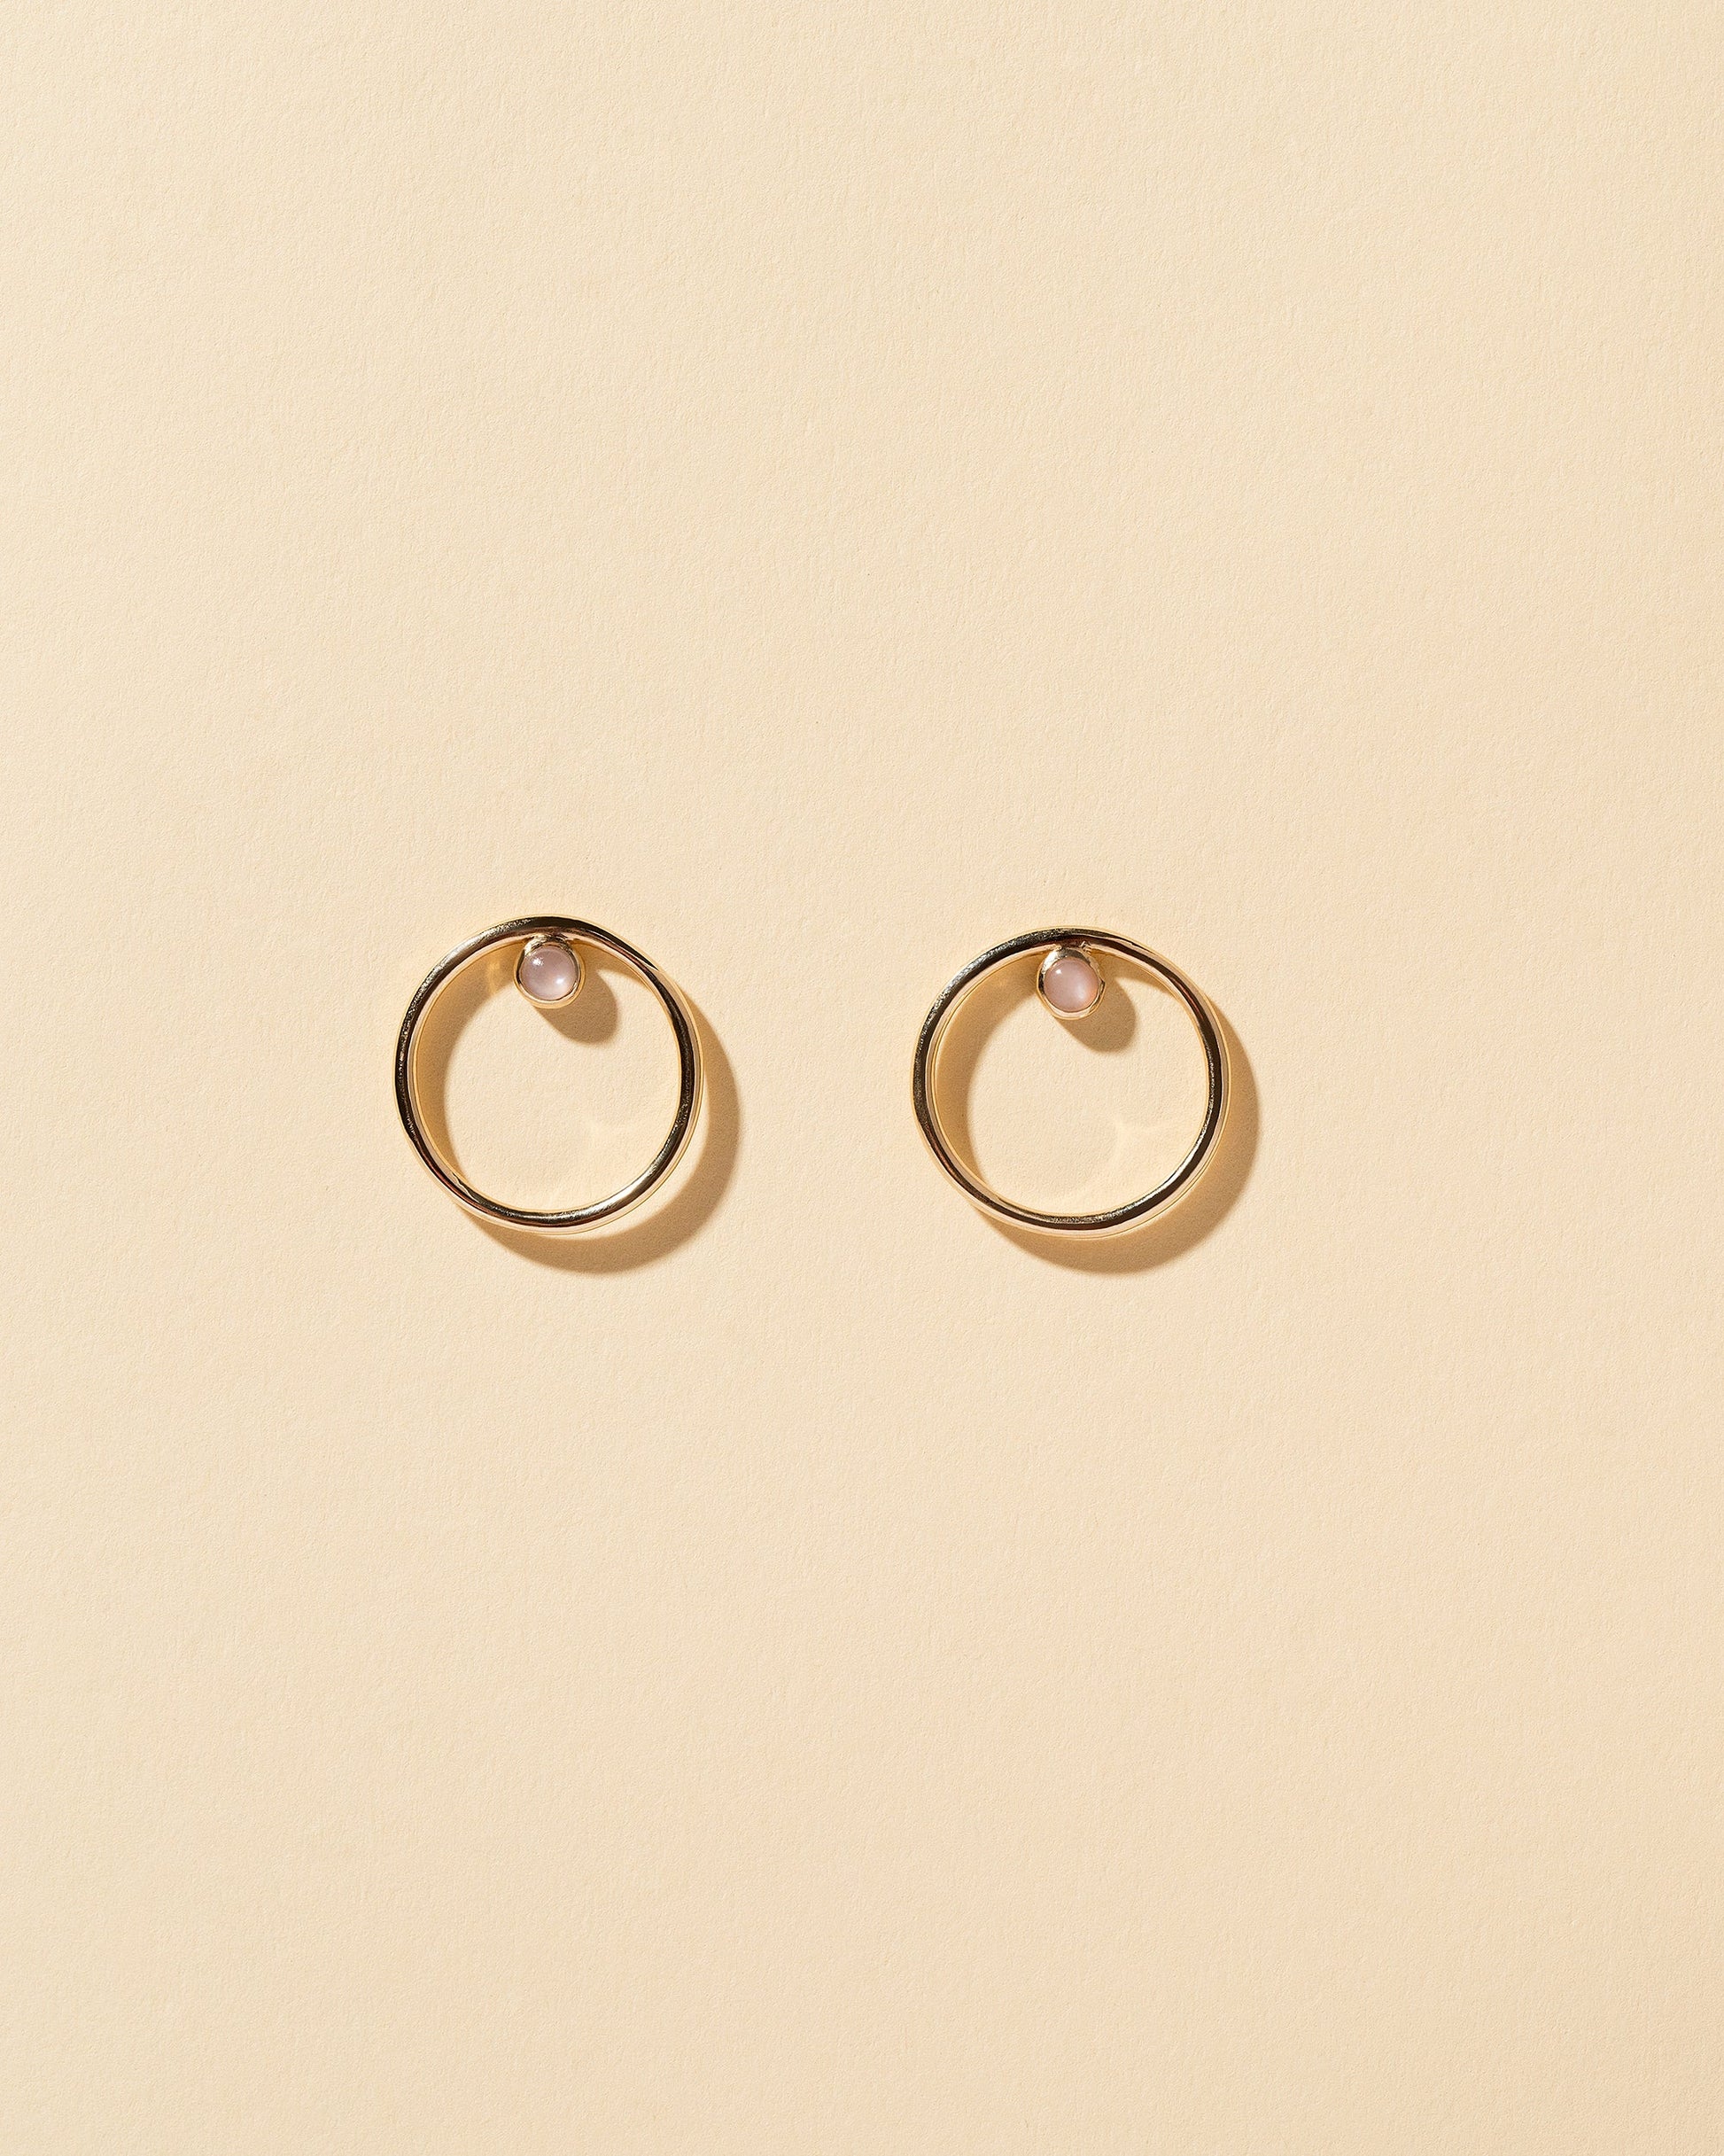  Coil Stud Earrings on light color background.